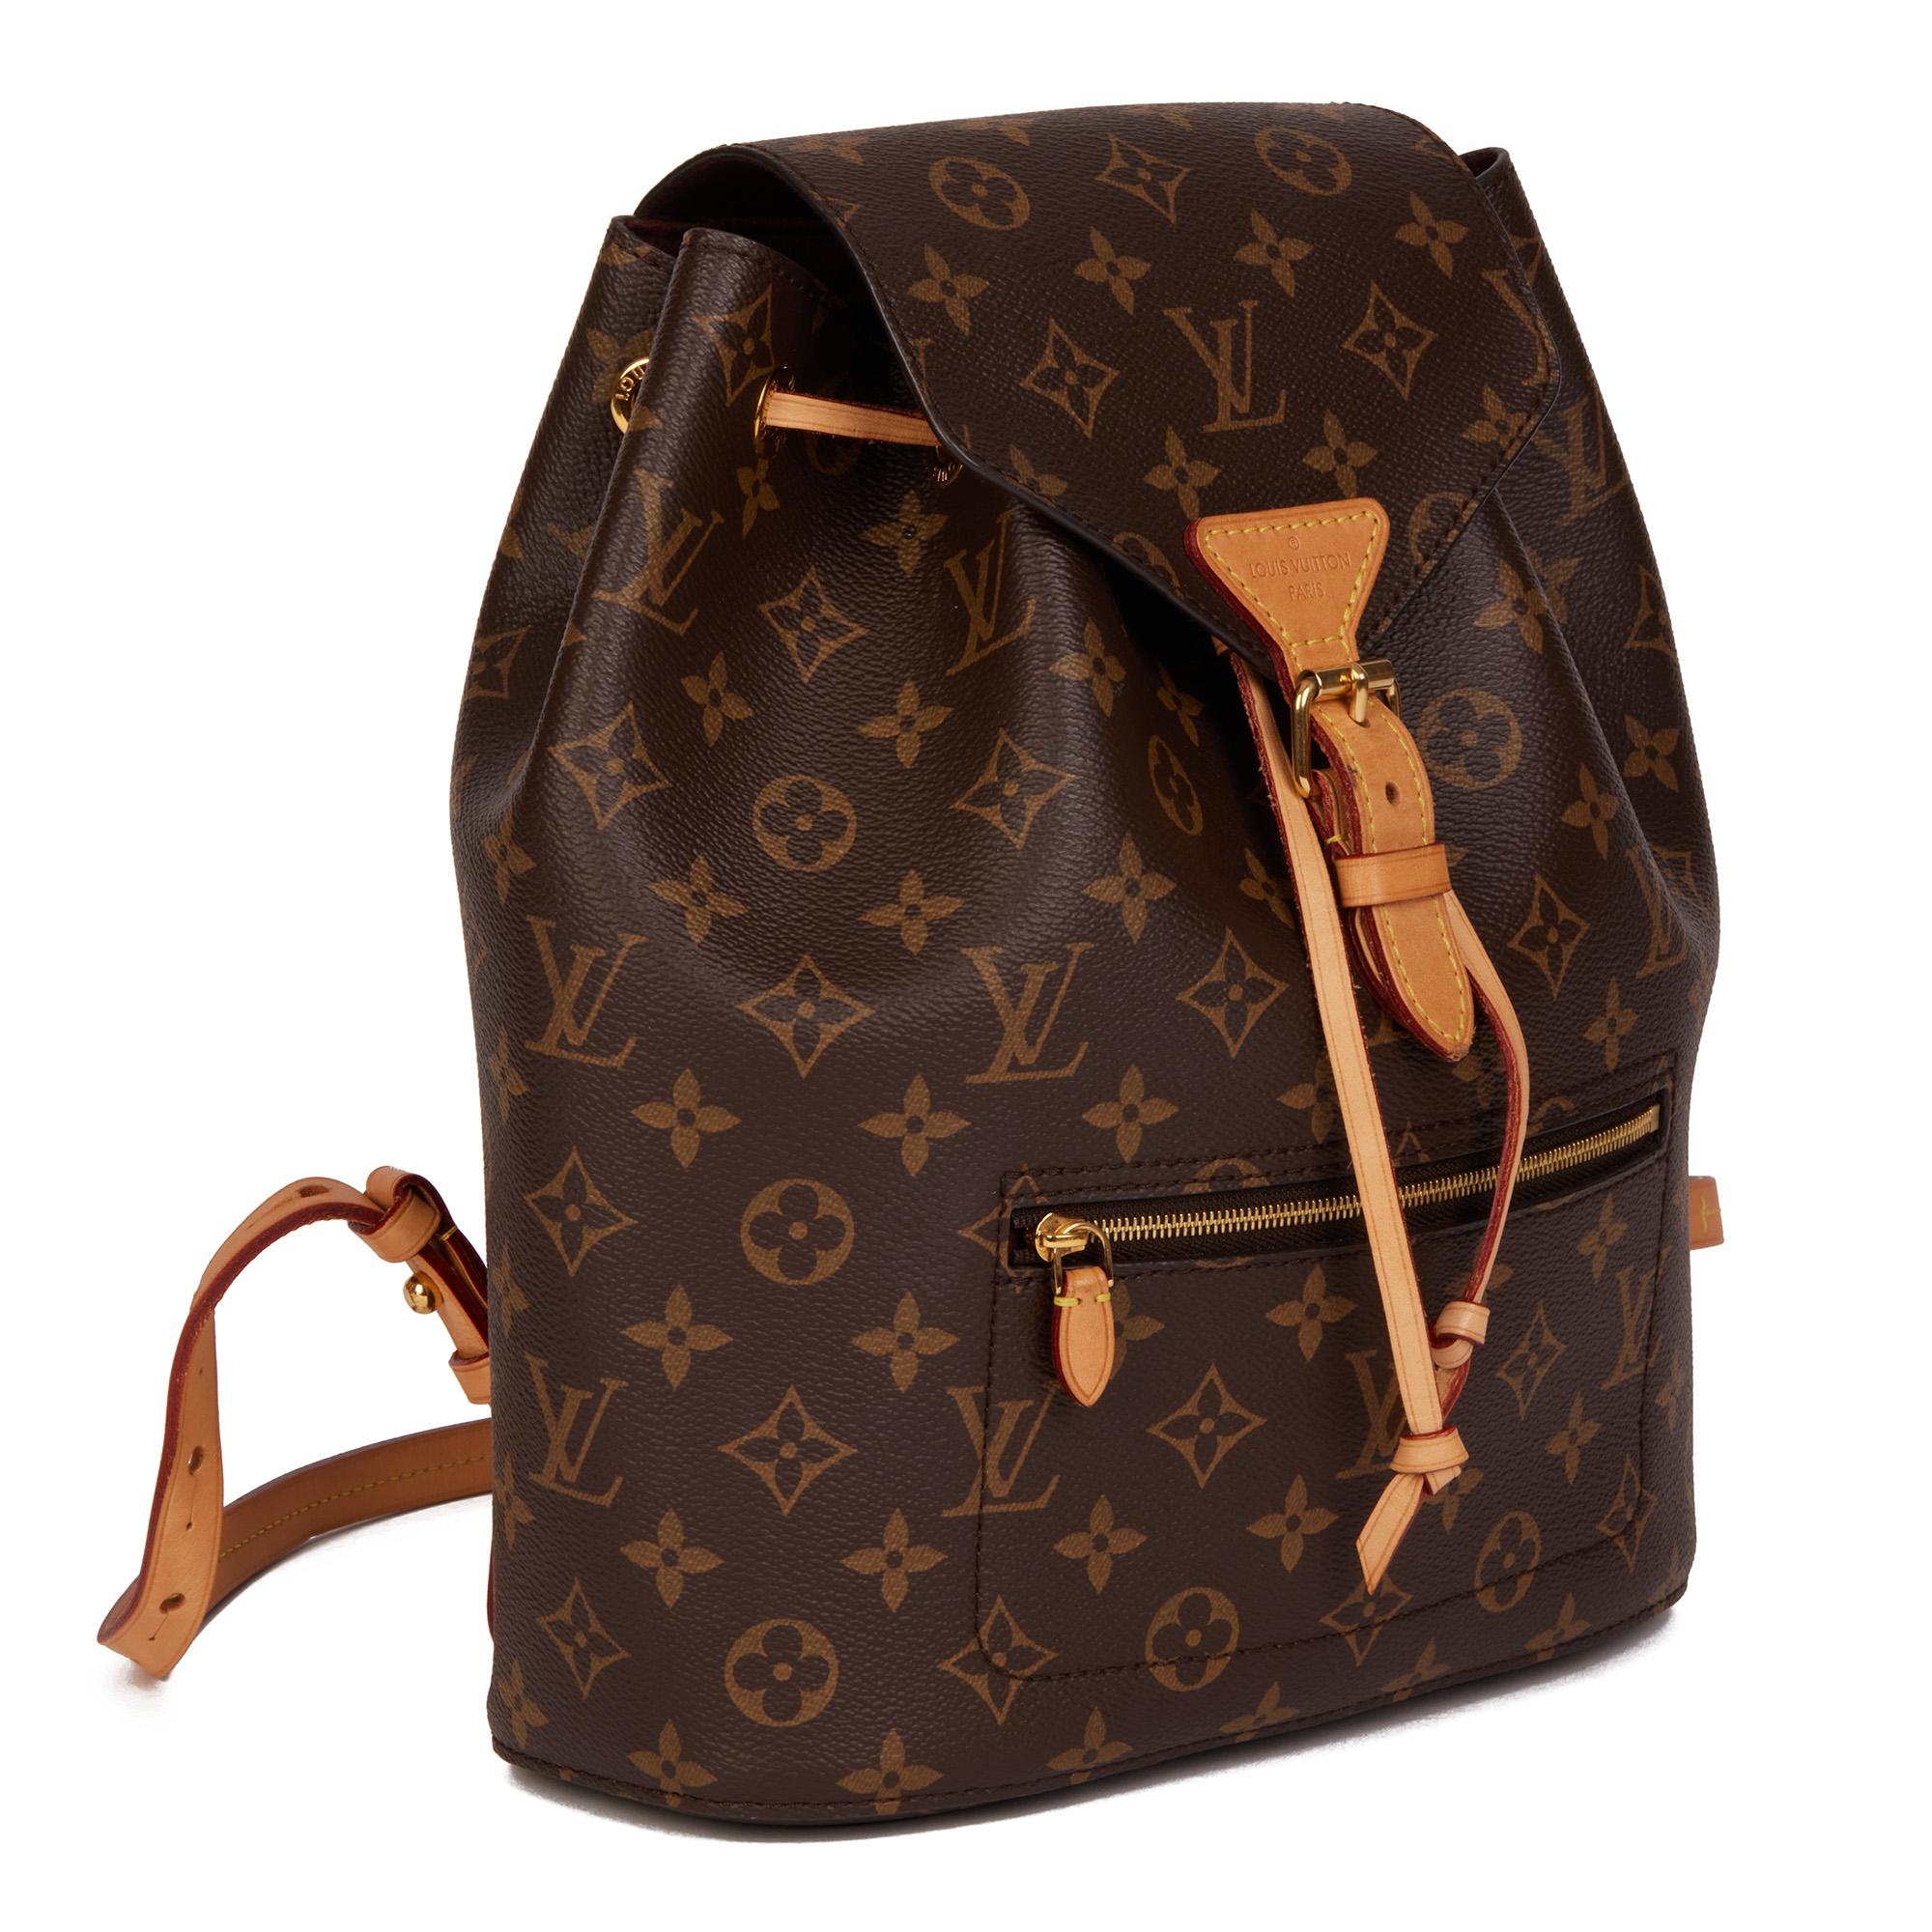 LOUIS VUITTON
Brown Monogram Coated Canvas & Vachetta Leather Montsouris NM

Xupes Reference: HB4151
Serial Number: SP3187
Age (Circa): 2017
Authenticity Details: Date Stamp (Made in France)
Gender: Ladies
Type: Backpack

Colour: Brown
Hardware: